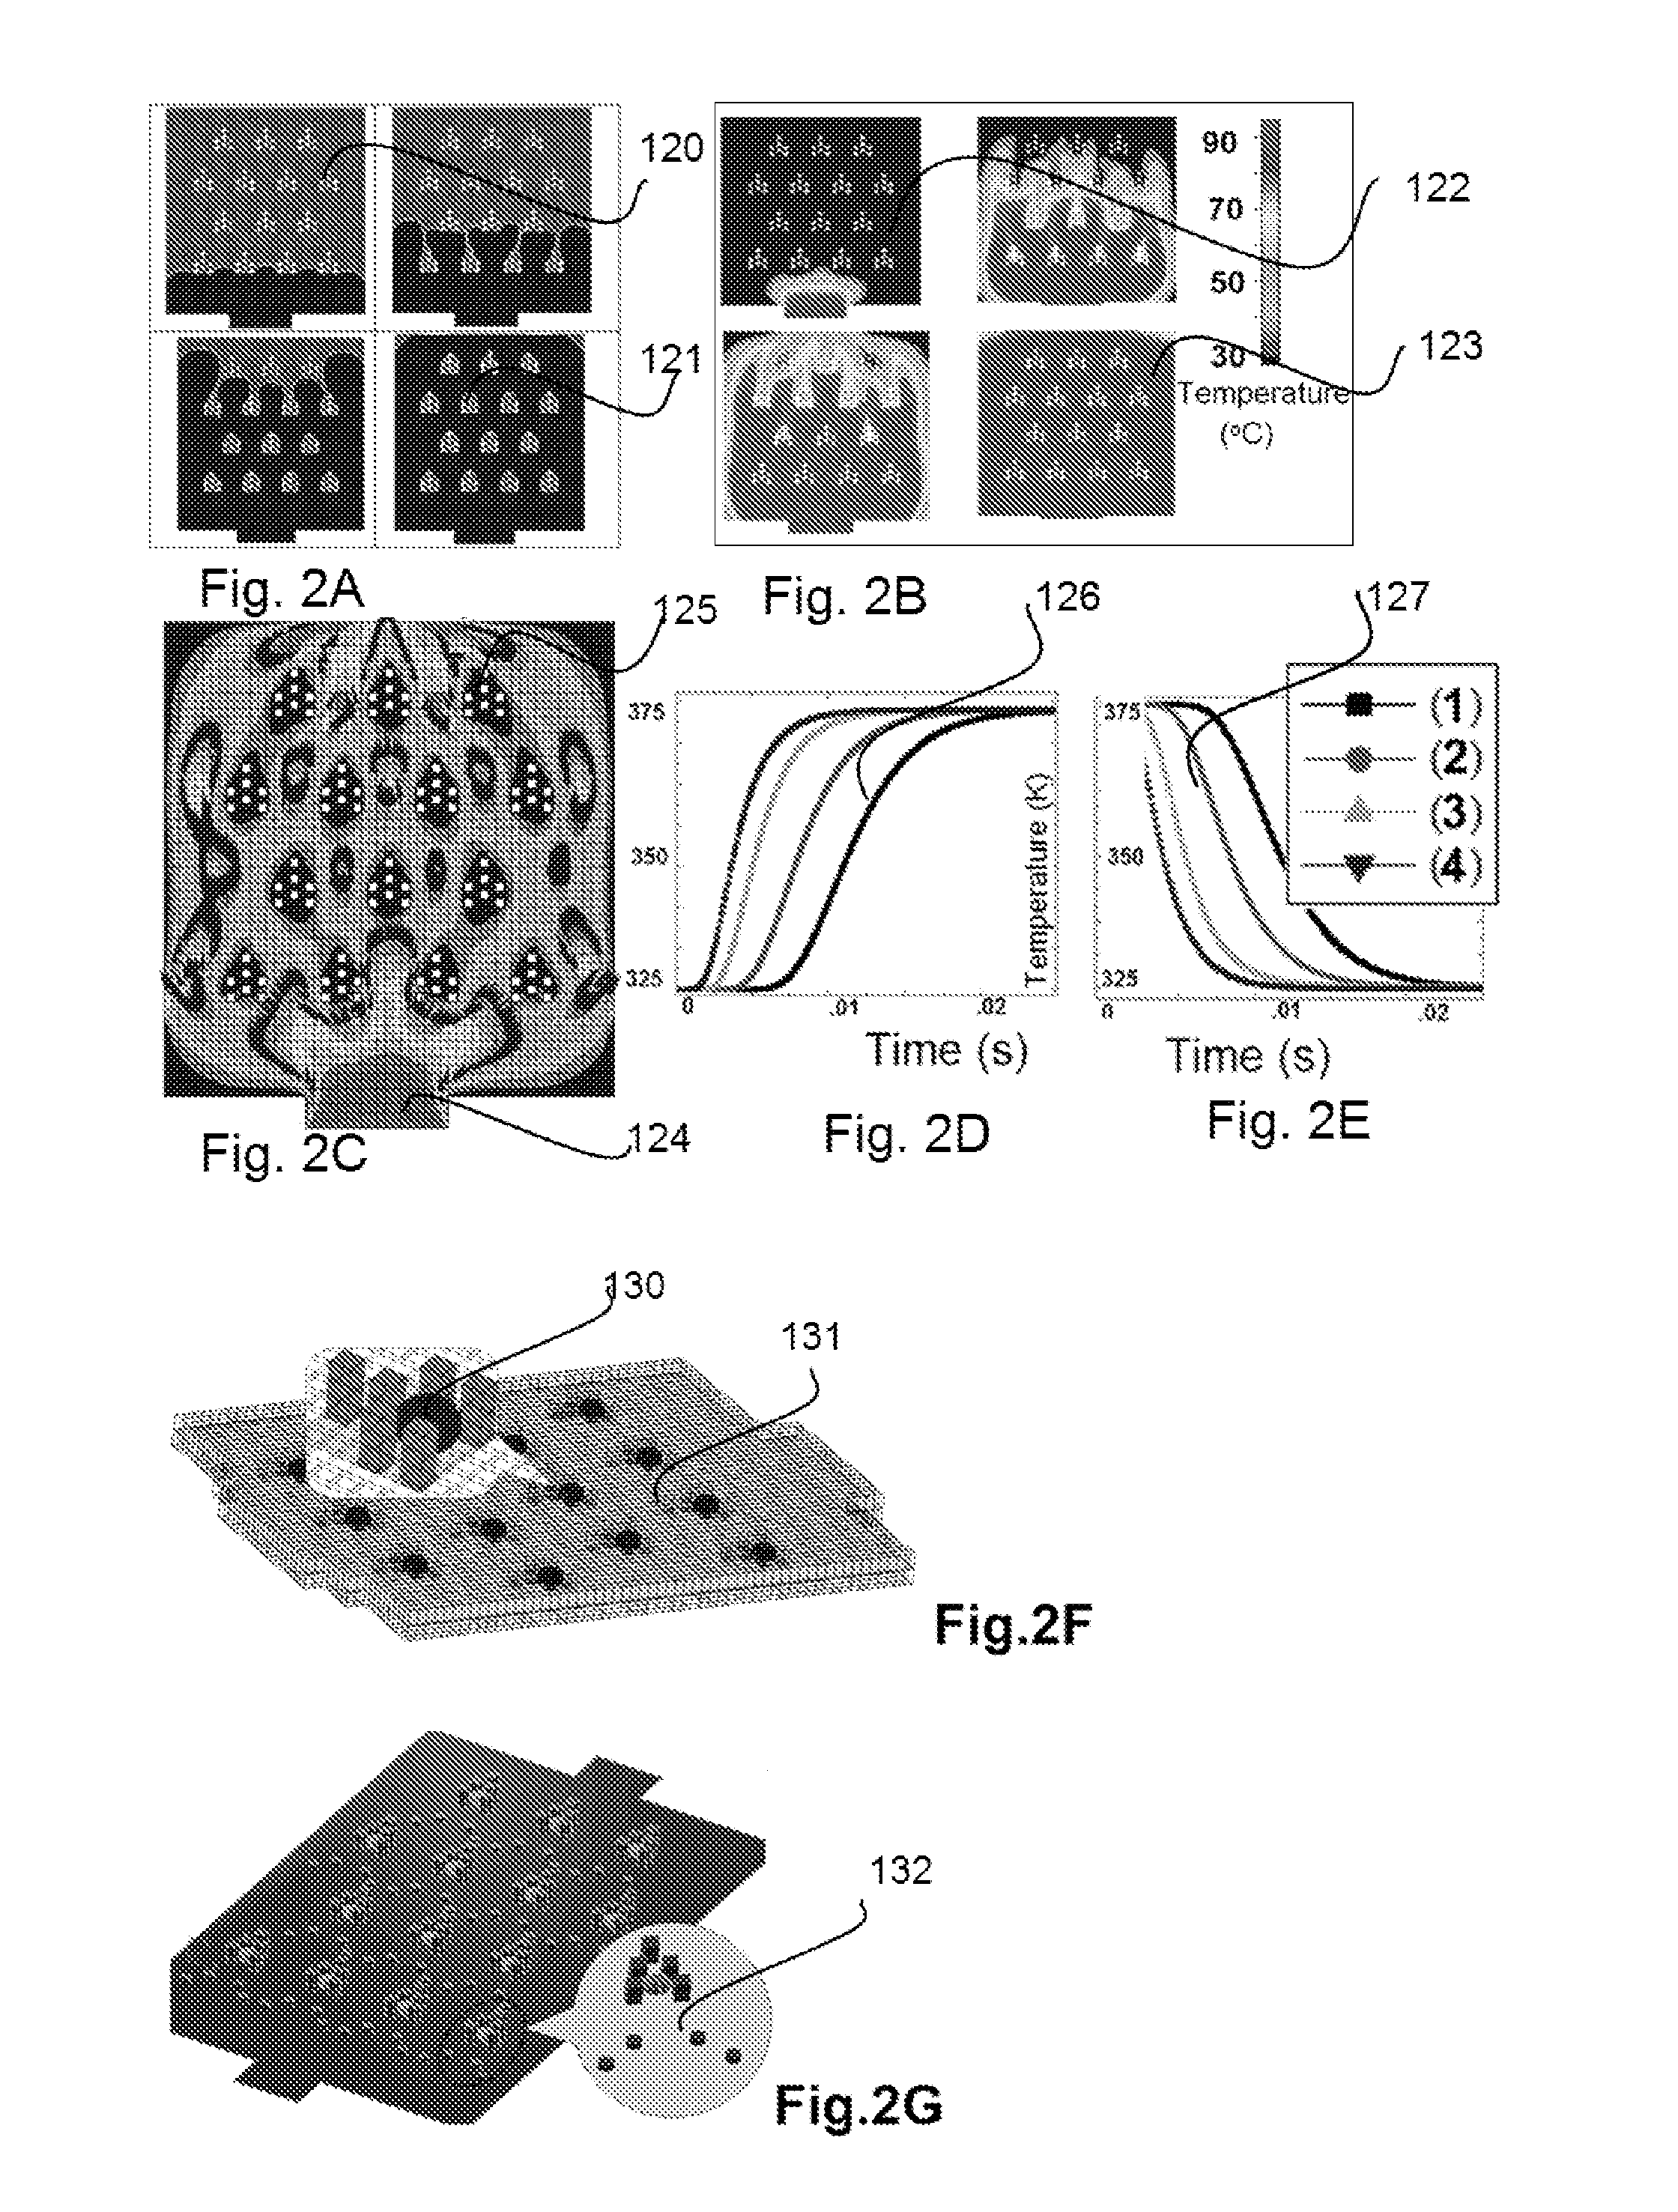 Microfluidic devices and methods based on massively parallel picoreactors for cell and molecular diagnostics